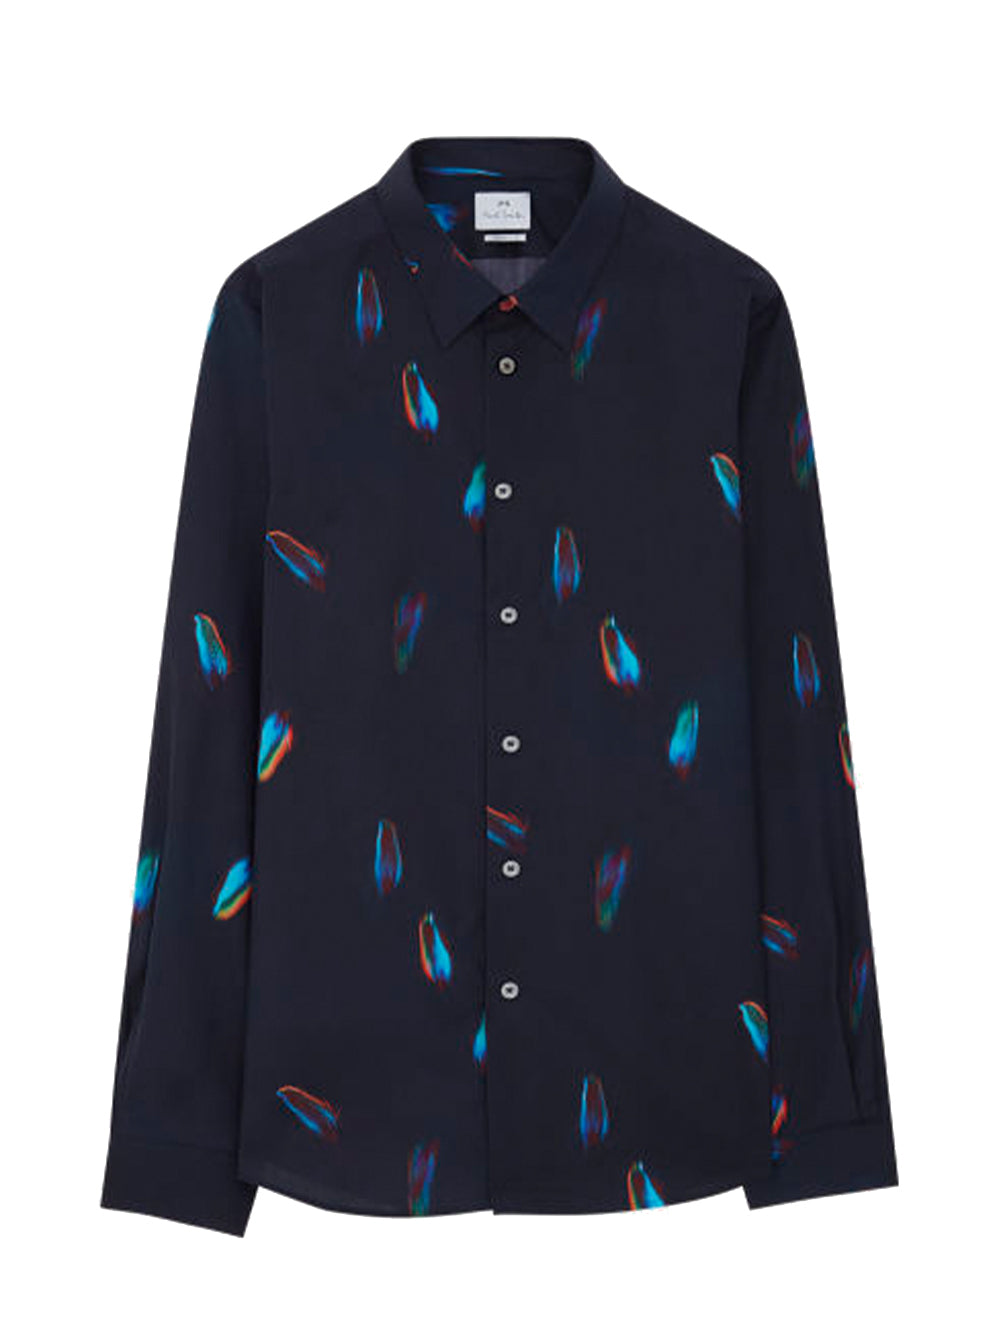 PS Paul Smith 'Falling Feather' Cotton Shirt (Navy)